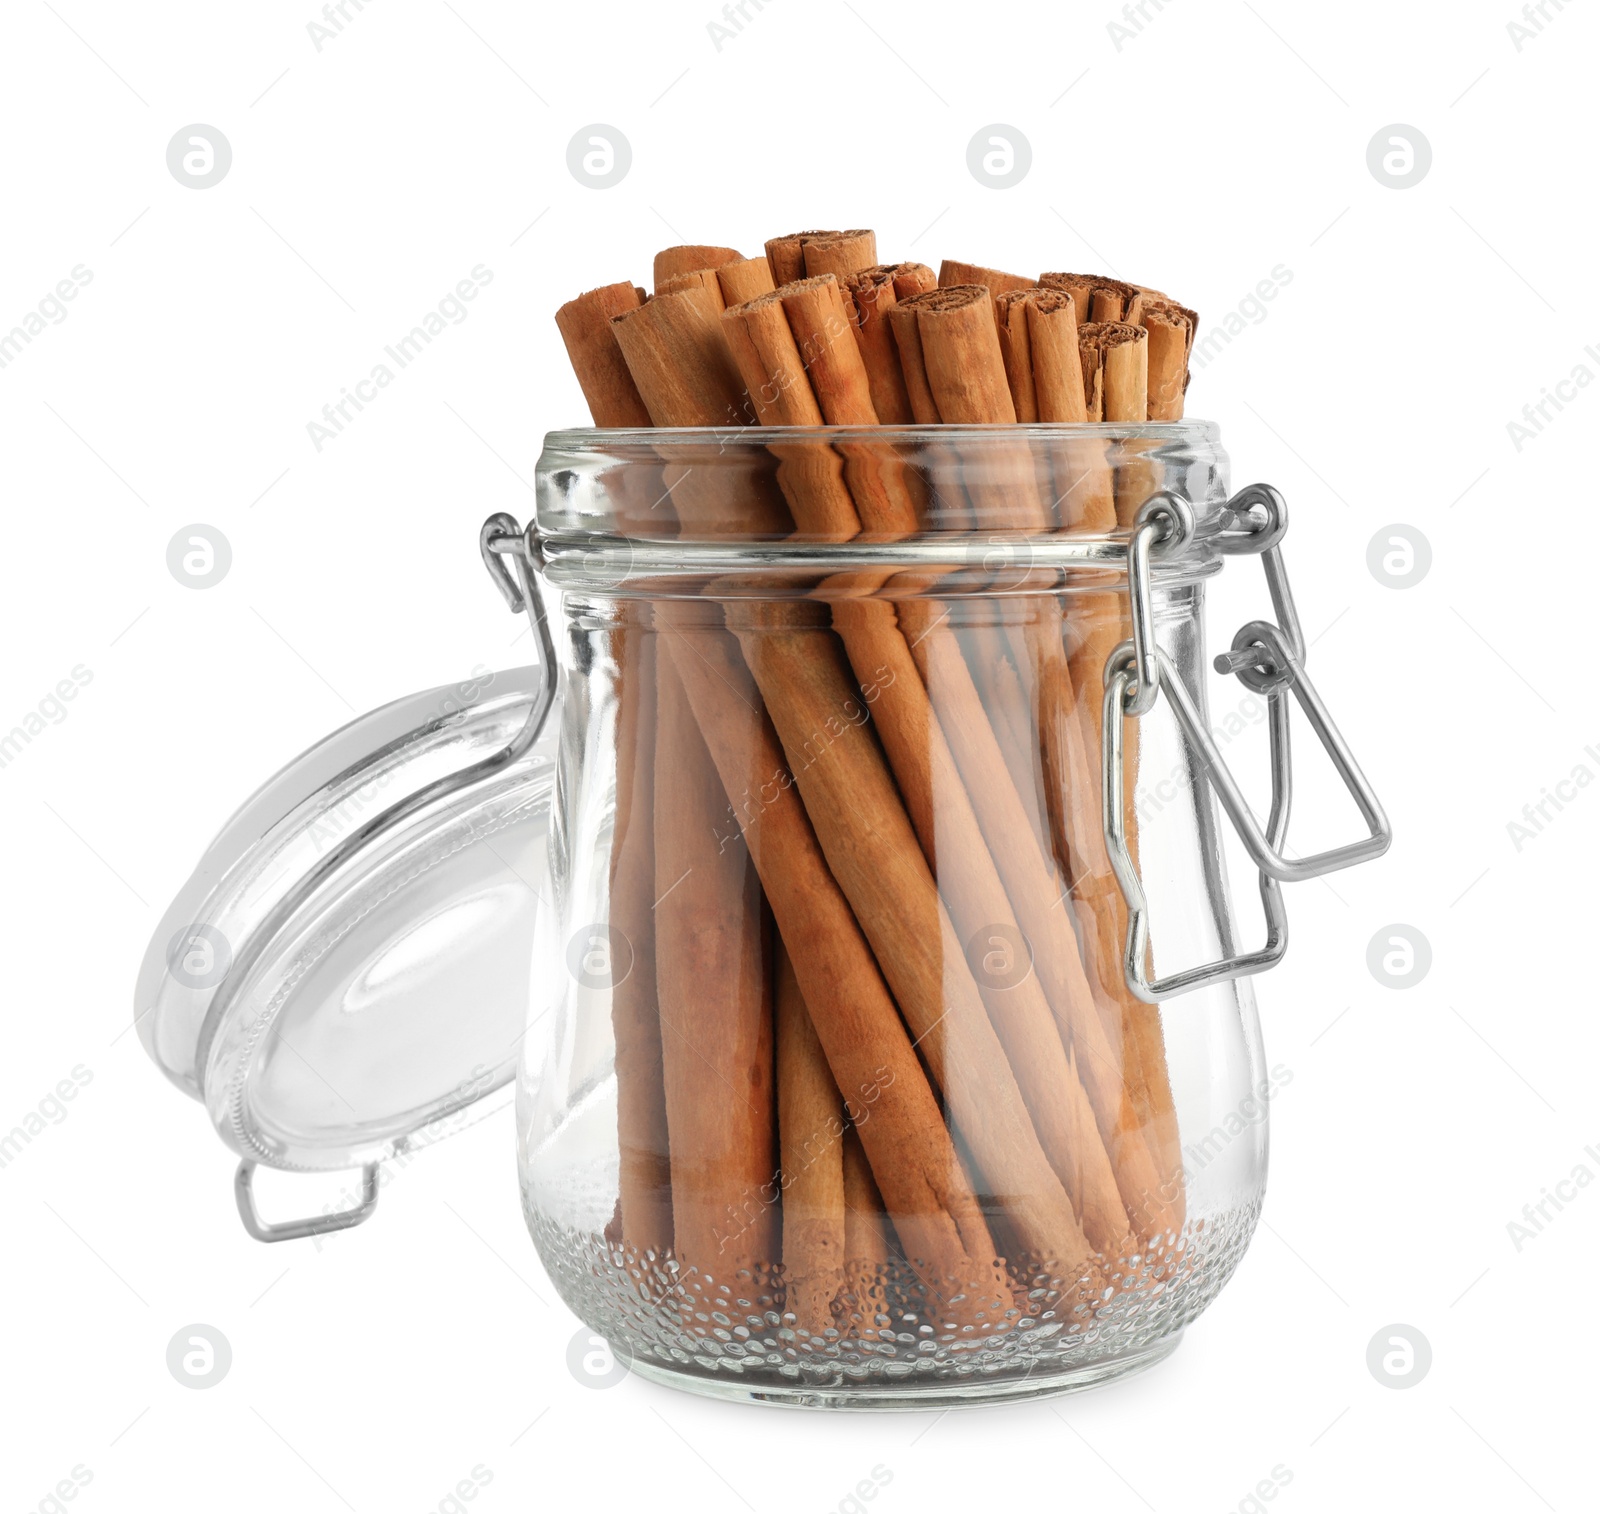 Photo of Aromatic dry cinnamon sticks in glass jar on white background